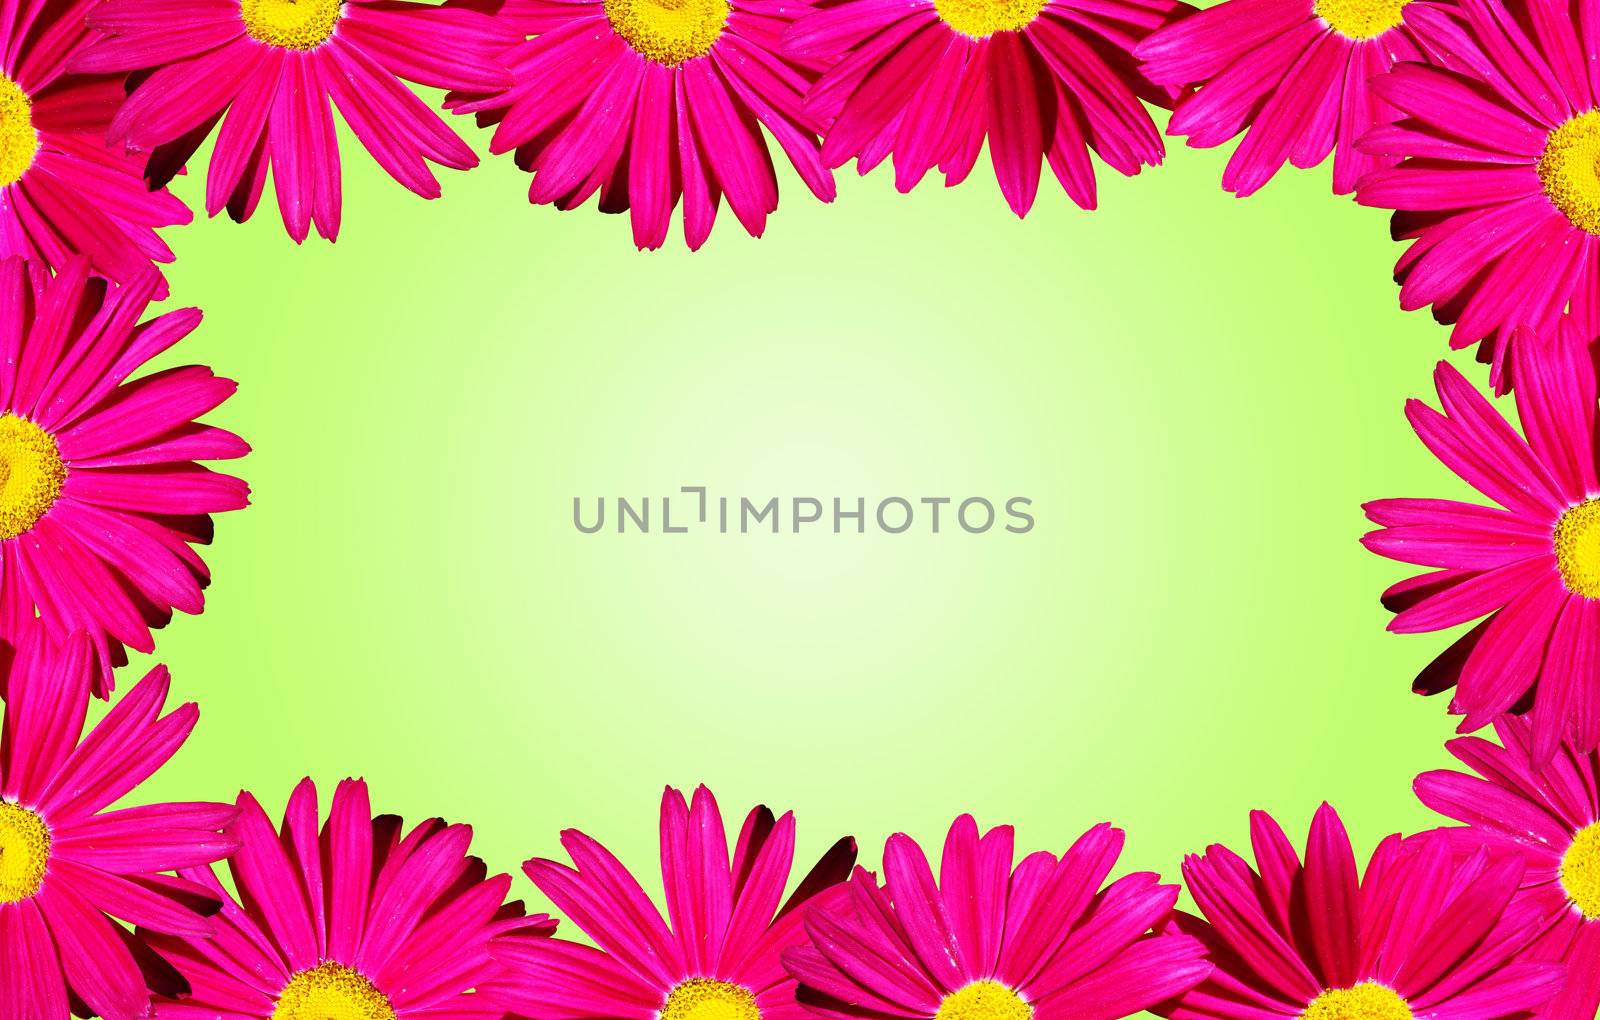 Pink daisies border over green by Mirage3